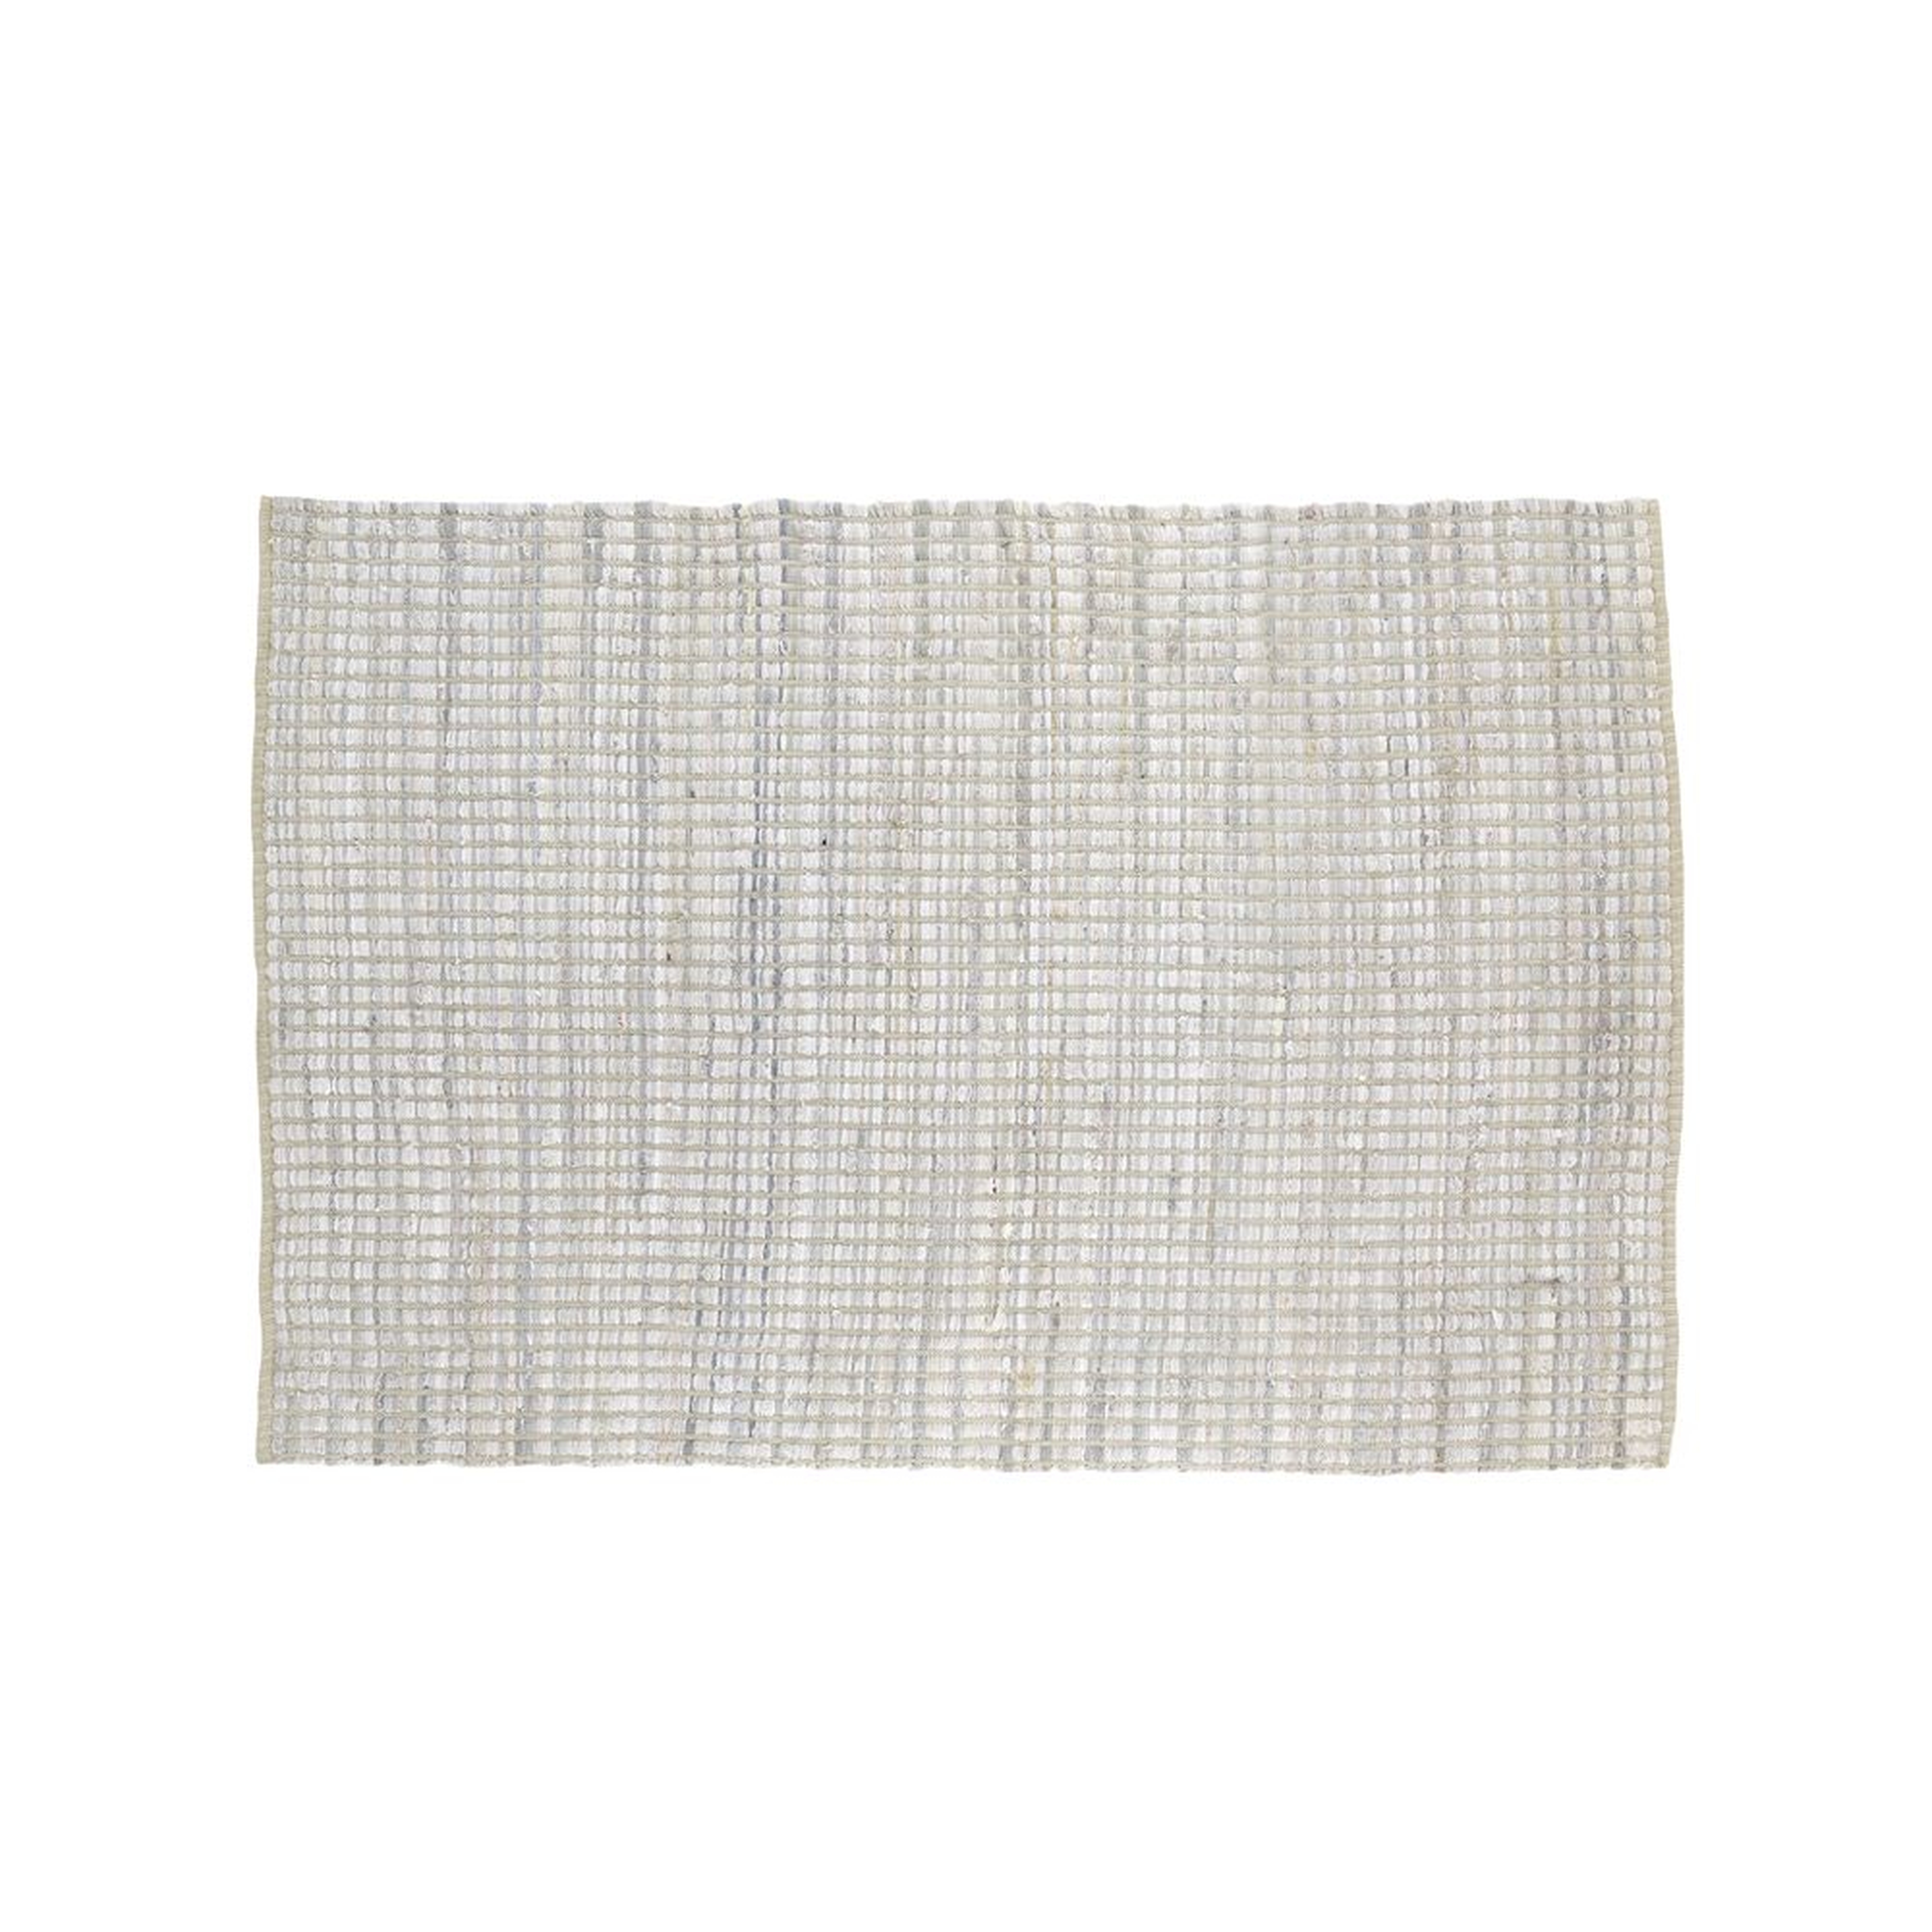 8x10' White Rag Rug - Crate and Barrel